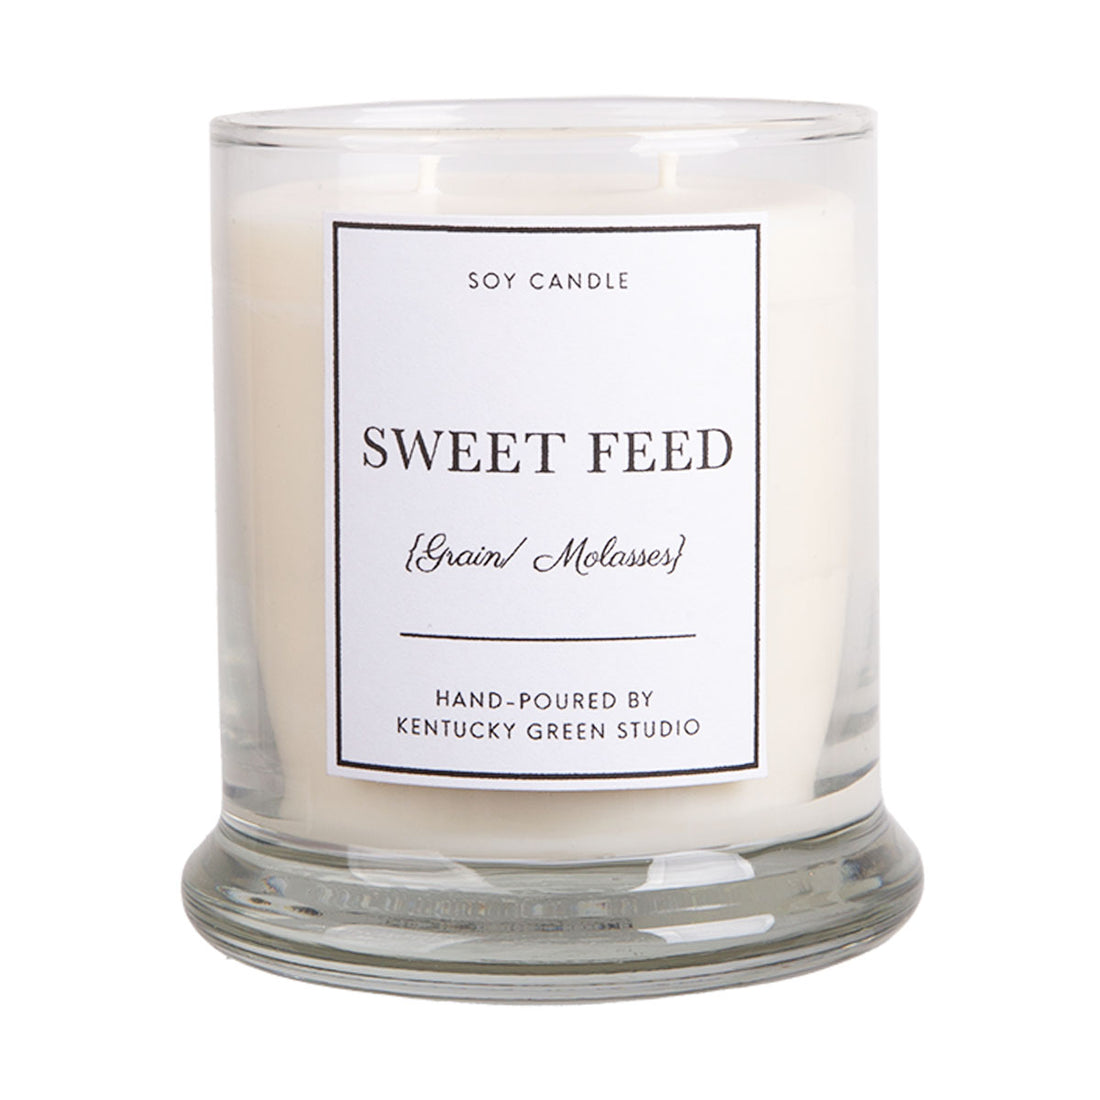 KY Green Studio Sweet Feed Soy Candle